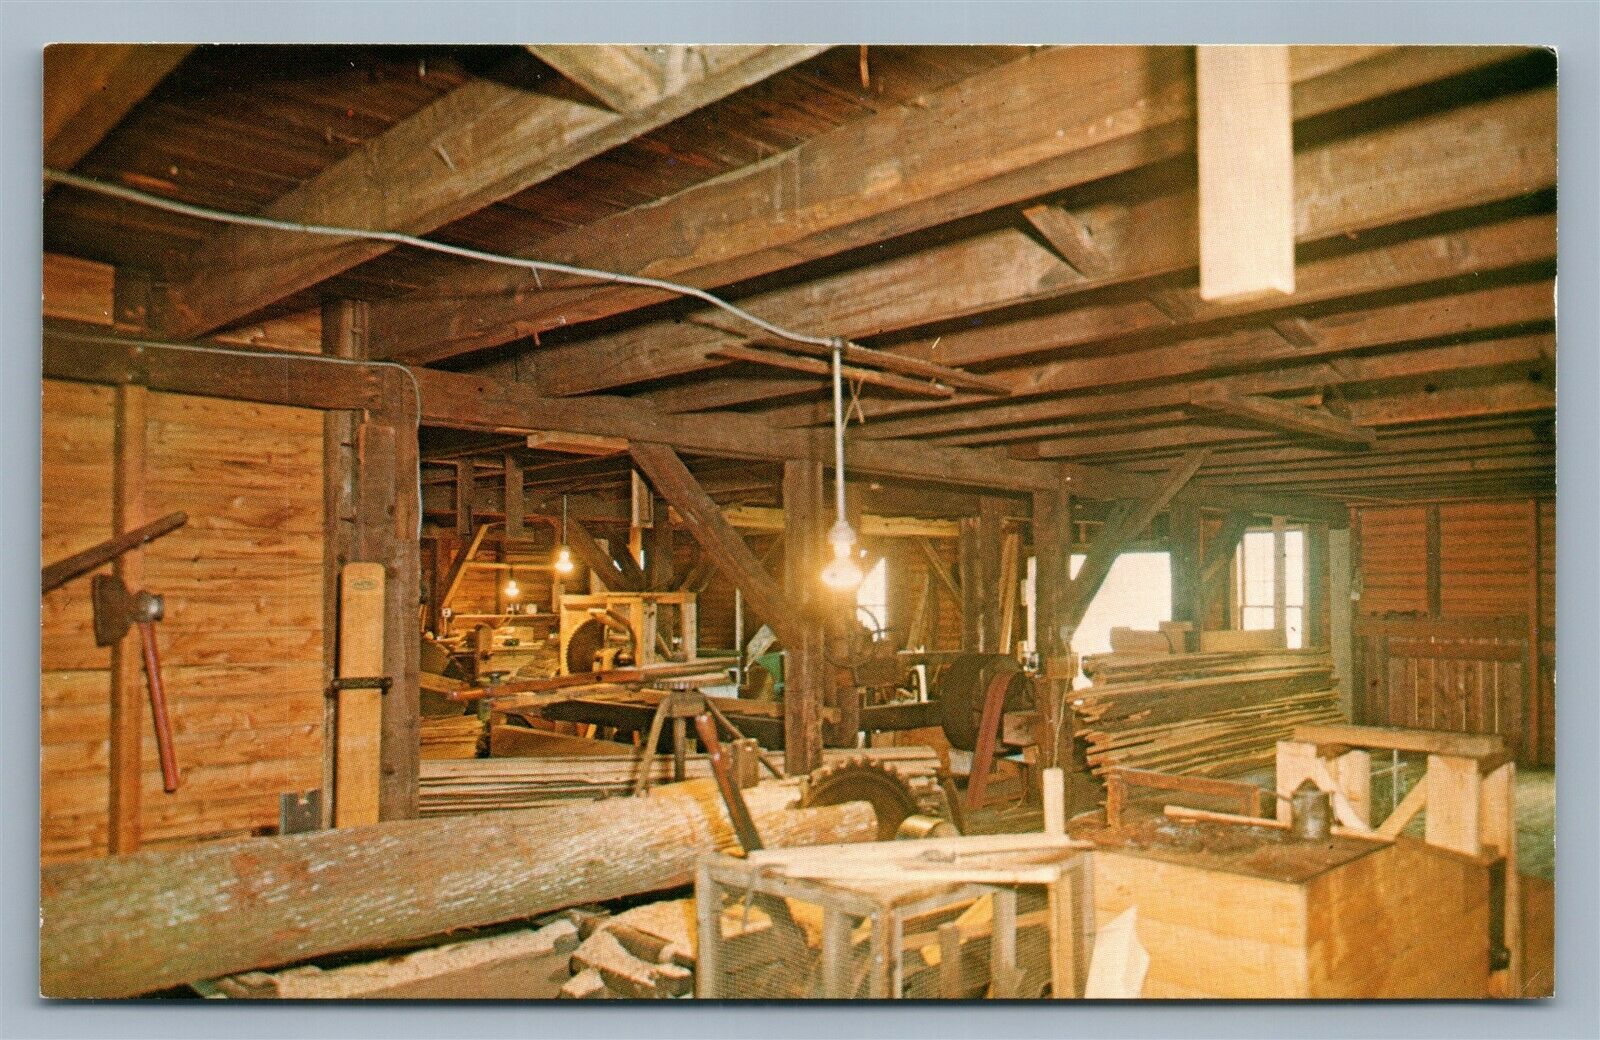 Batsto - Interior of the saw Mill